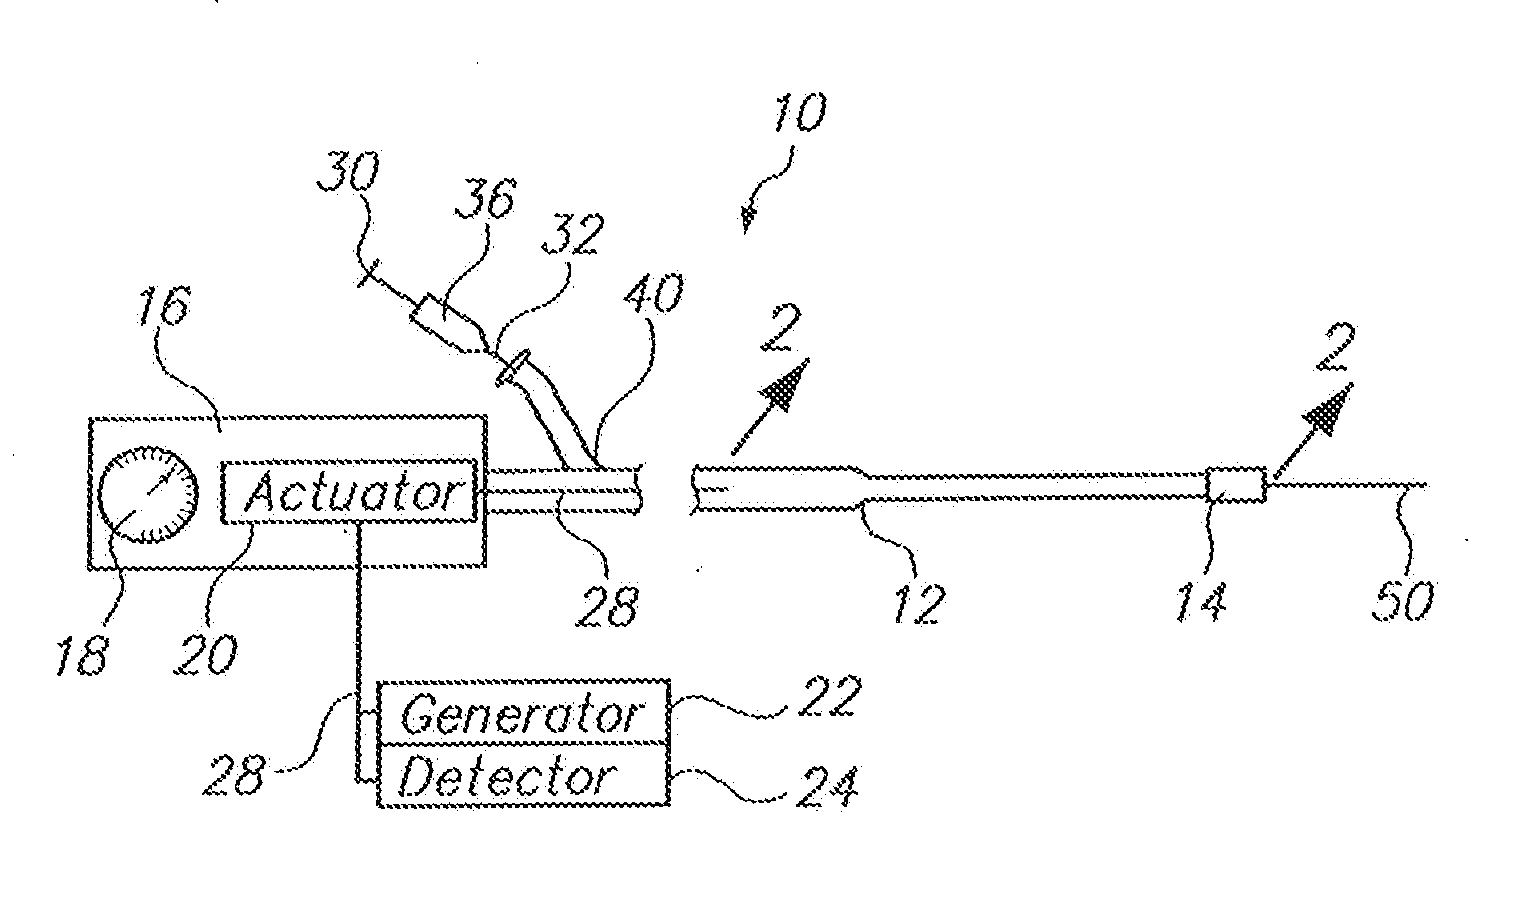 System and Method for Visualizing Catheter Placement in a Vasculature